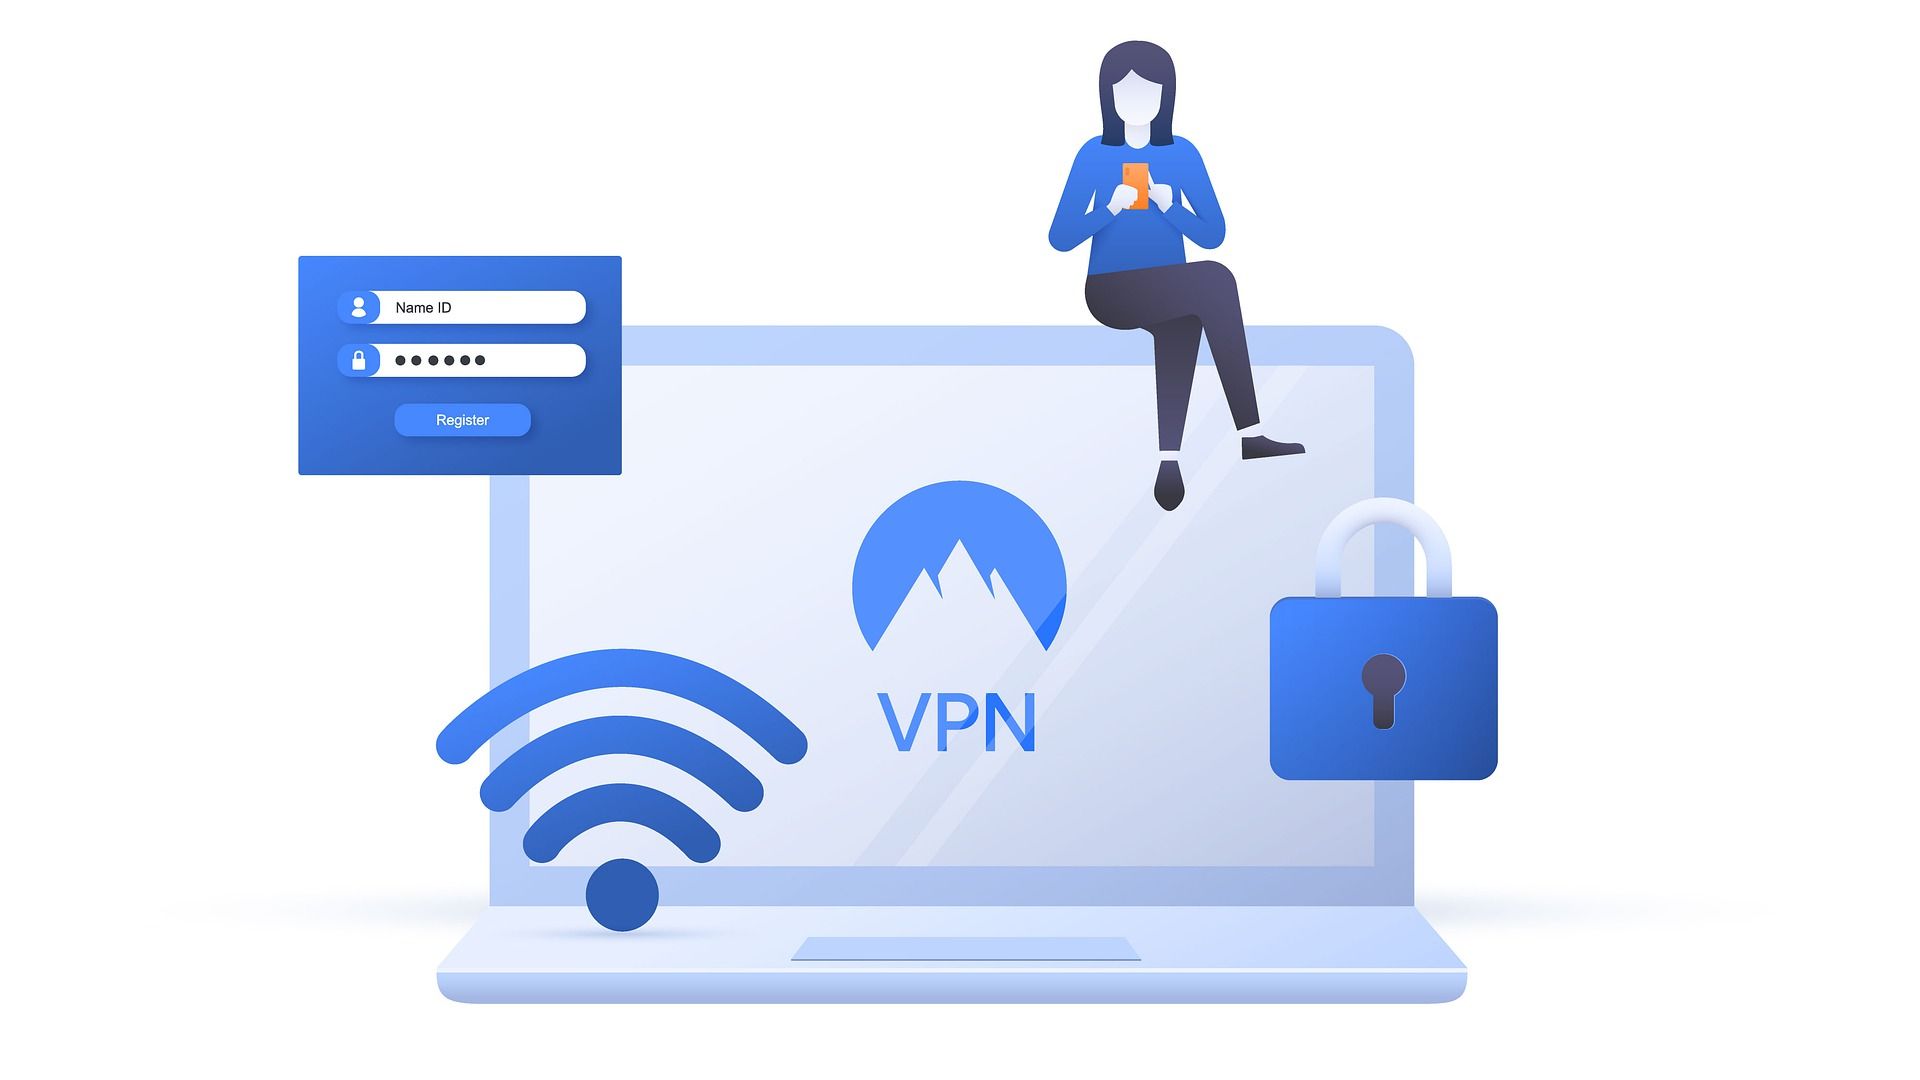 NordVPN helps you stay safe on in the internet